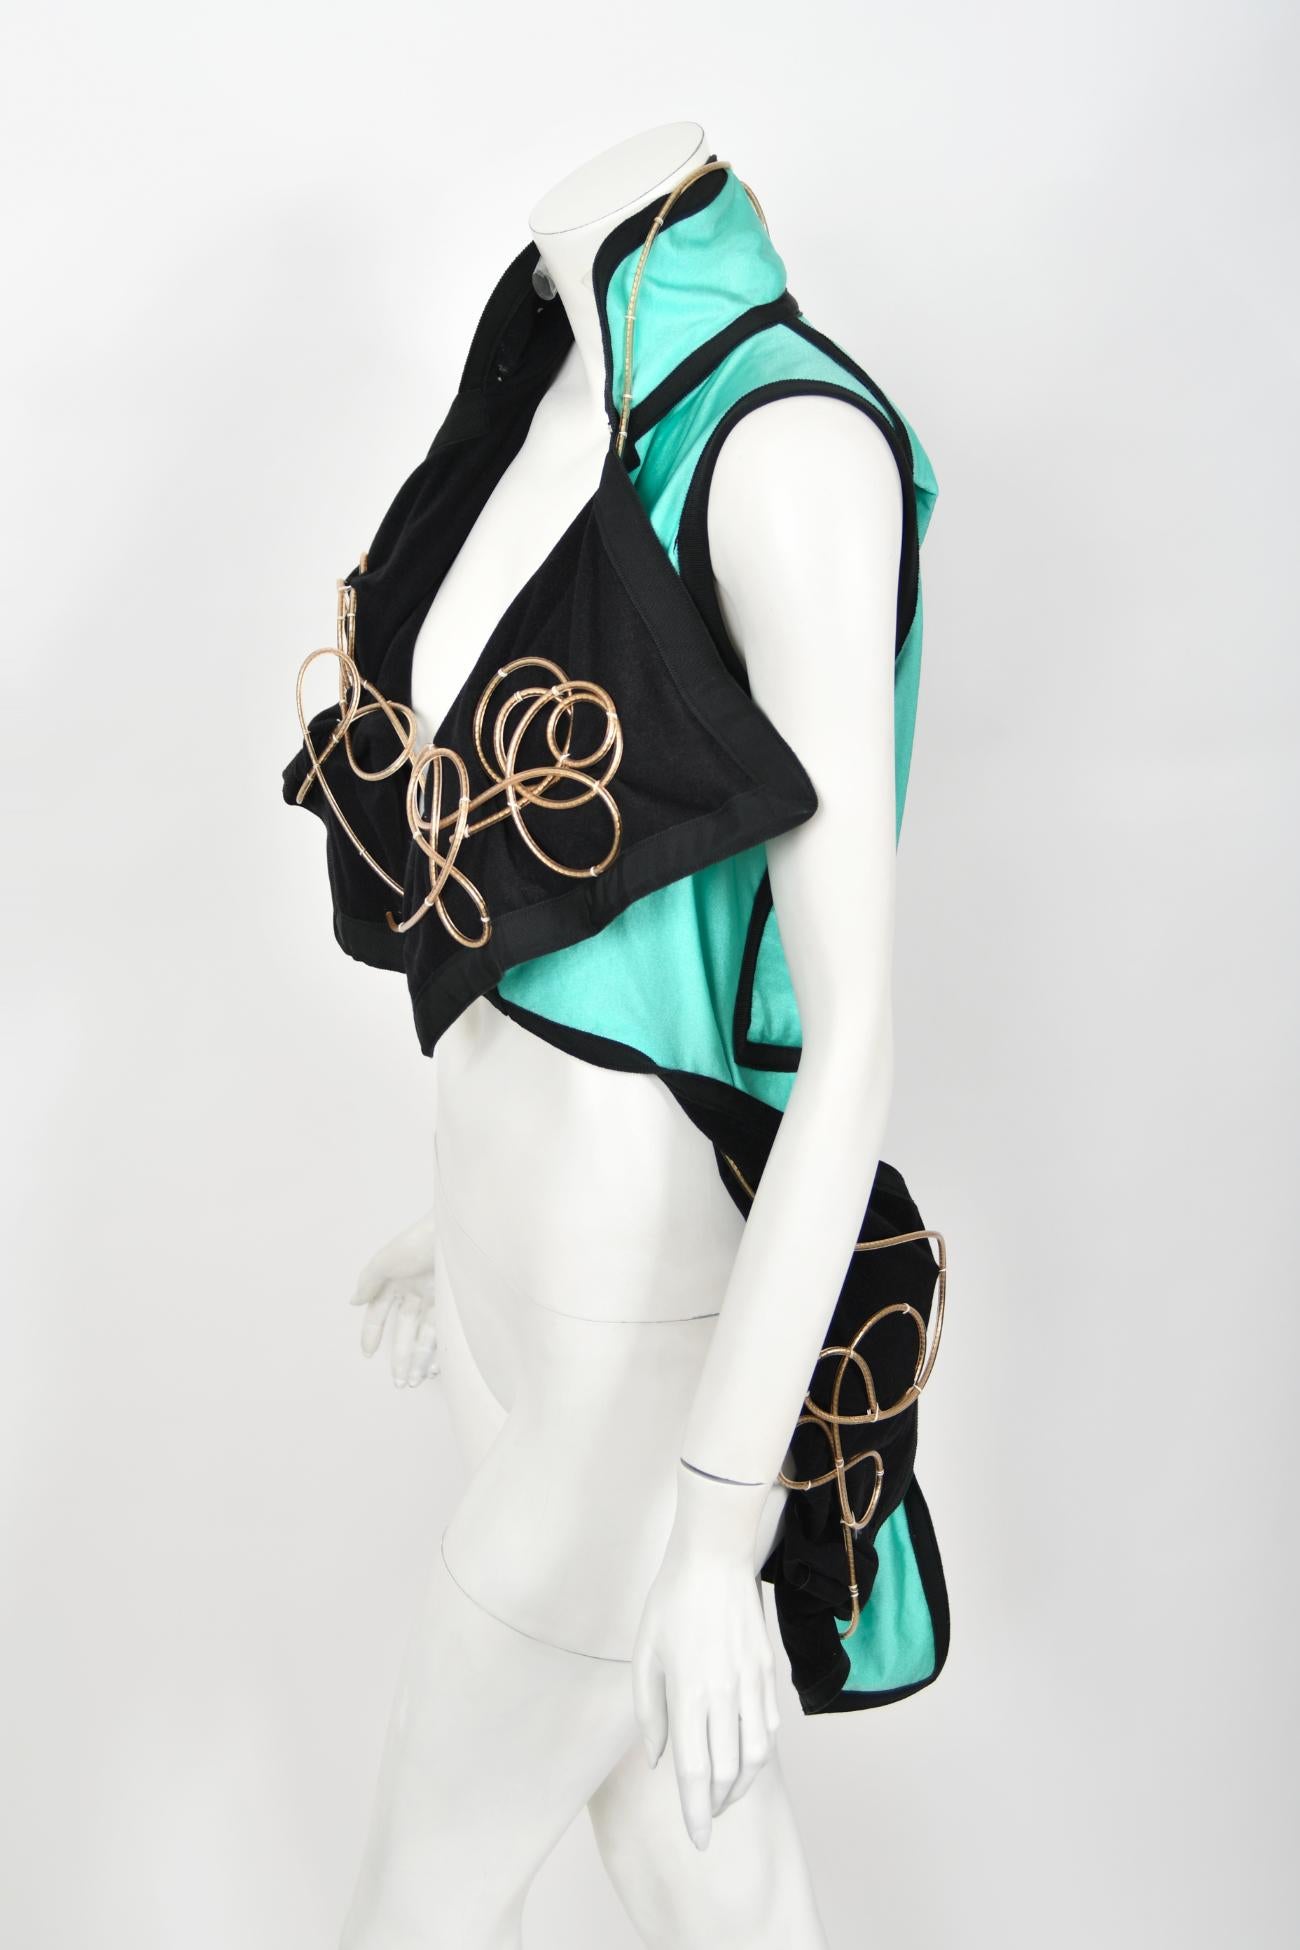 1991 John Galliano Documented Runway Black & Blue Military Inspired Cropped Vest 3